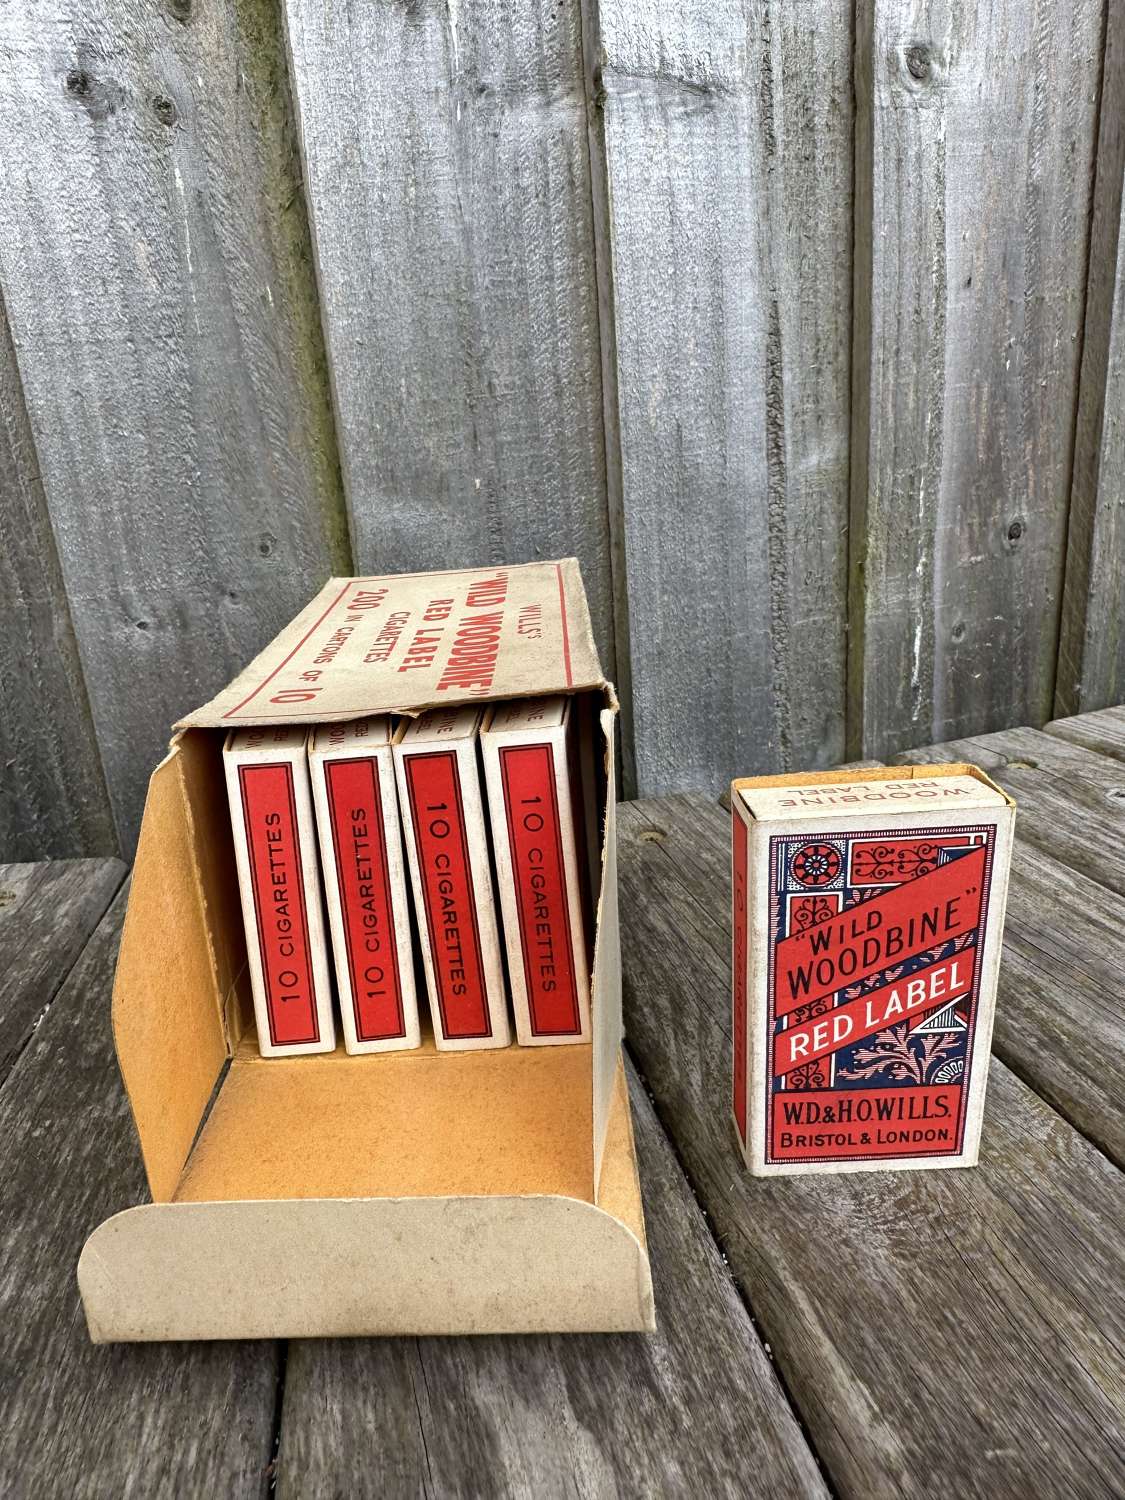 Wills wild woodbine red label shop box, complete with live 10 packs.